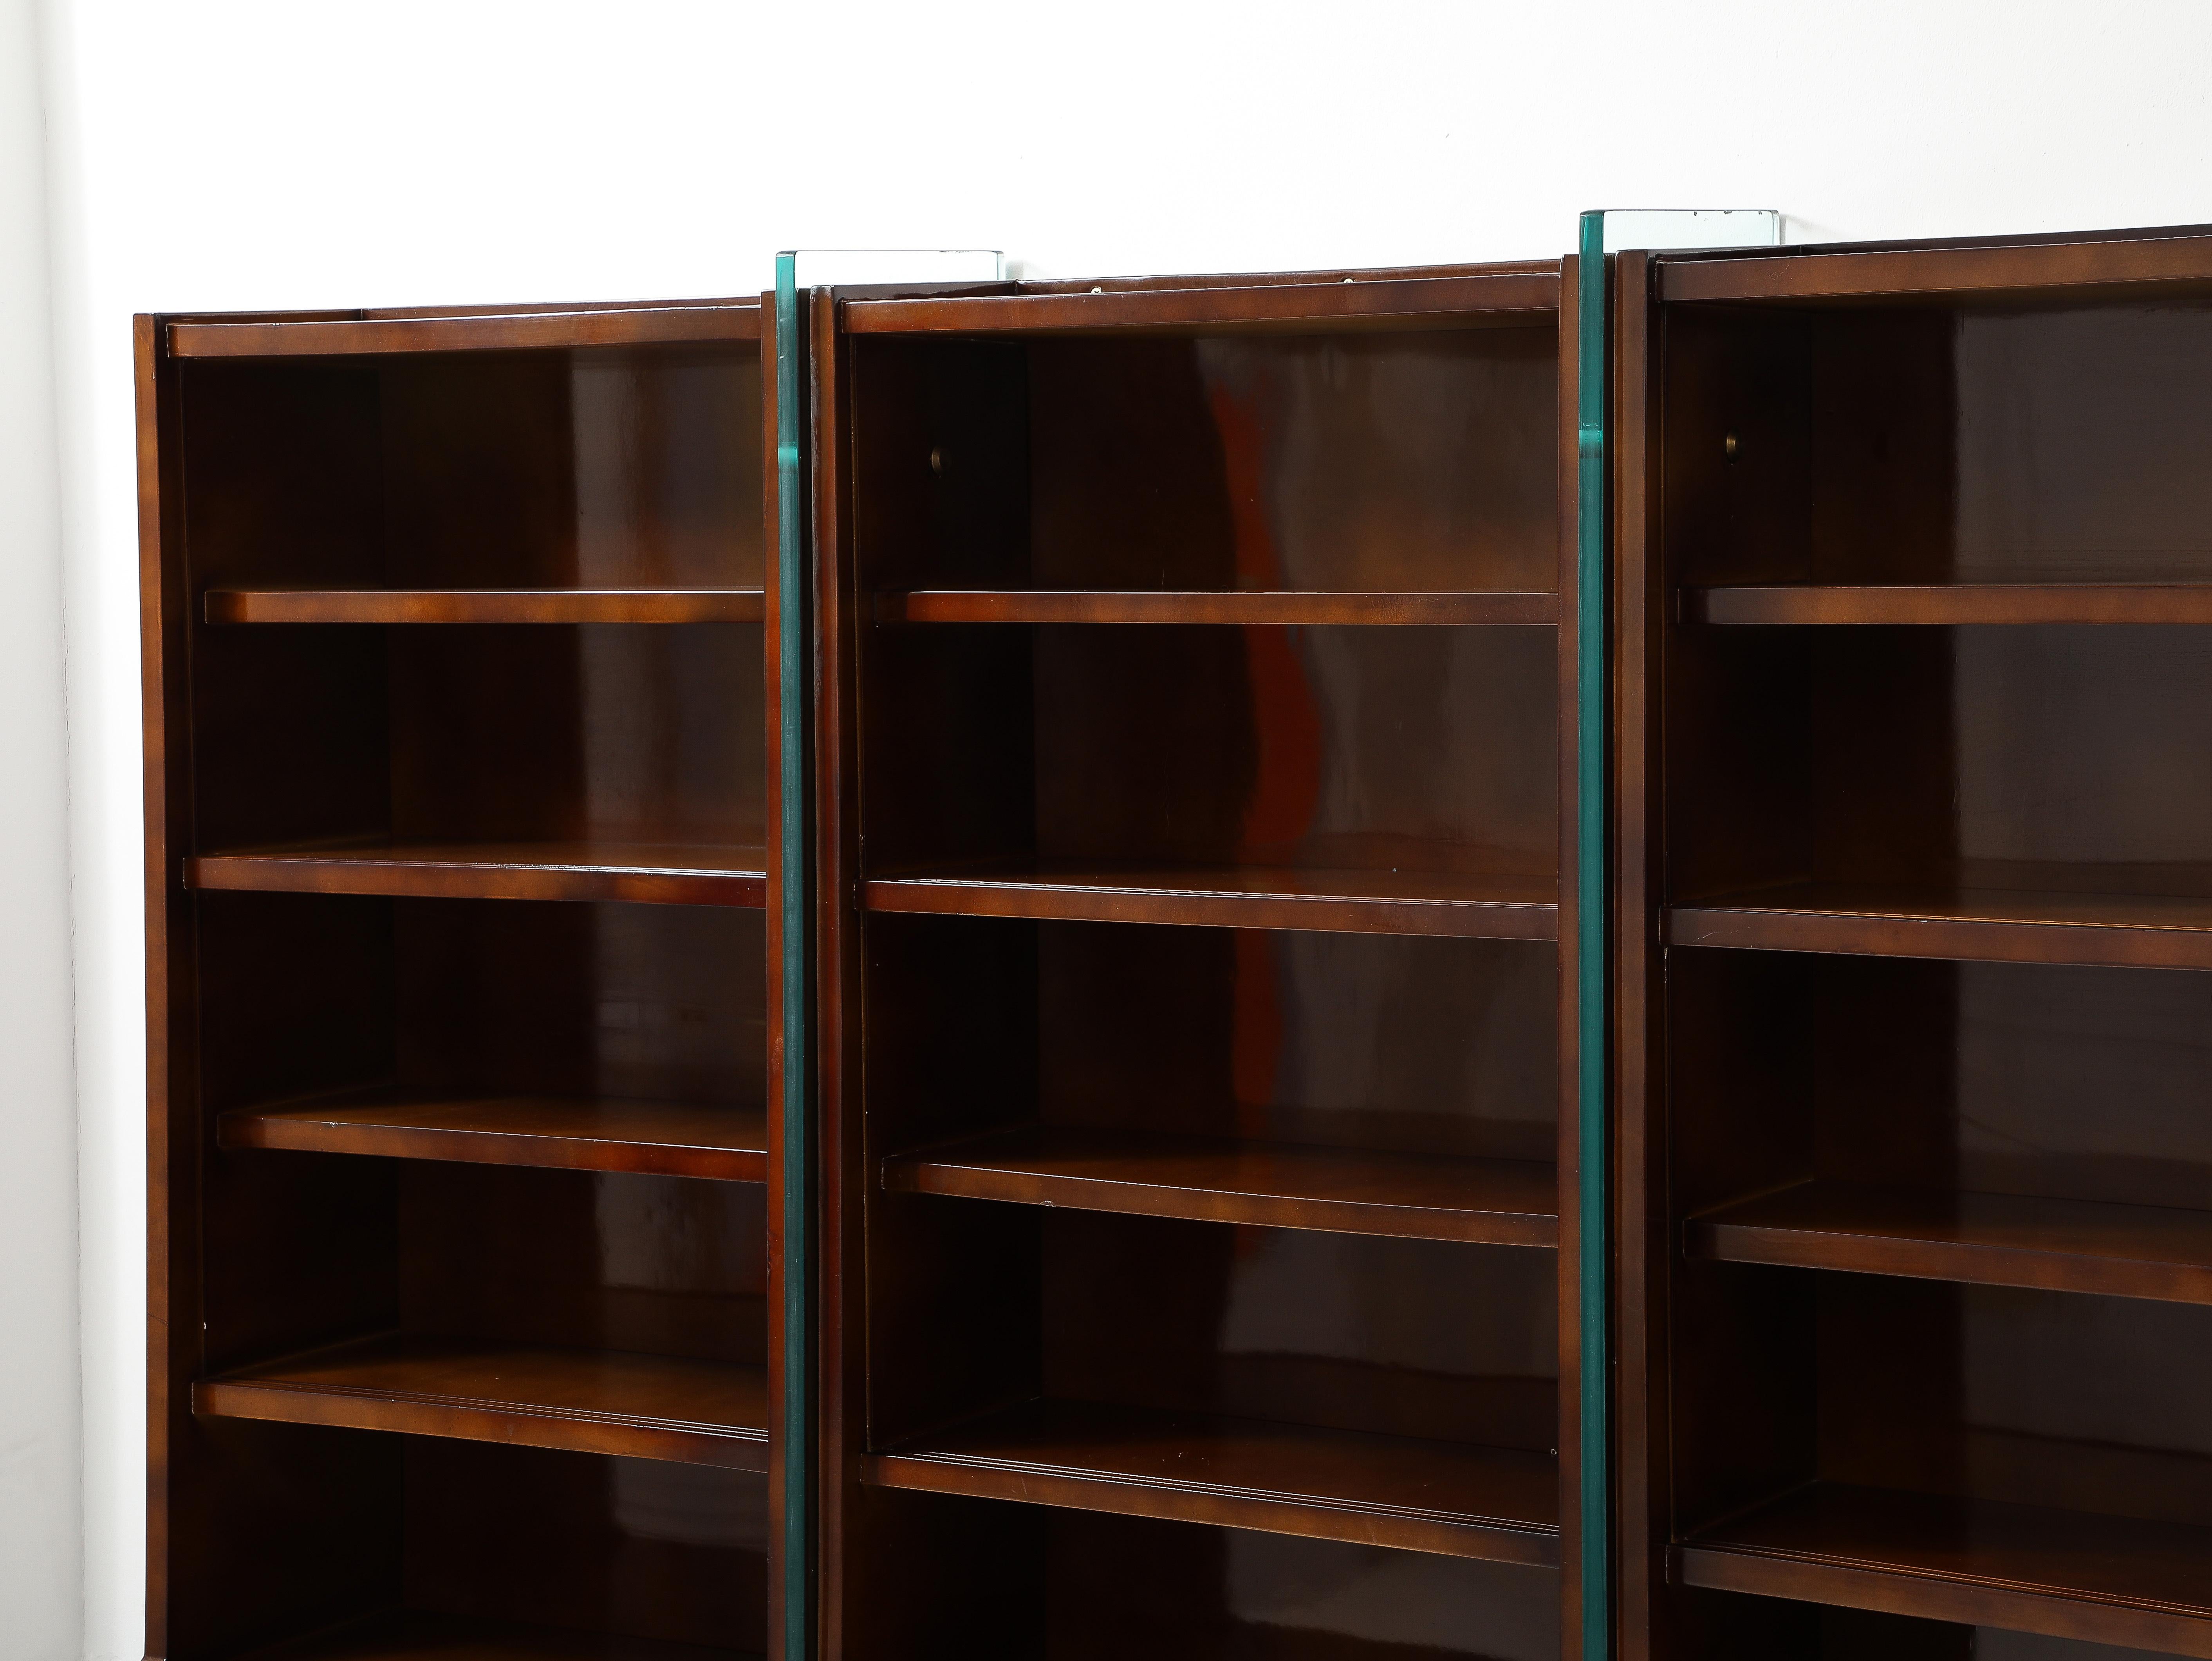 European Raphael Raphel Bookcase in Lacquered Wood & Glass, France 1950's For Sale